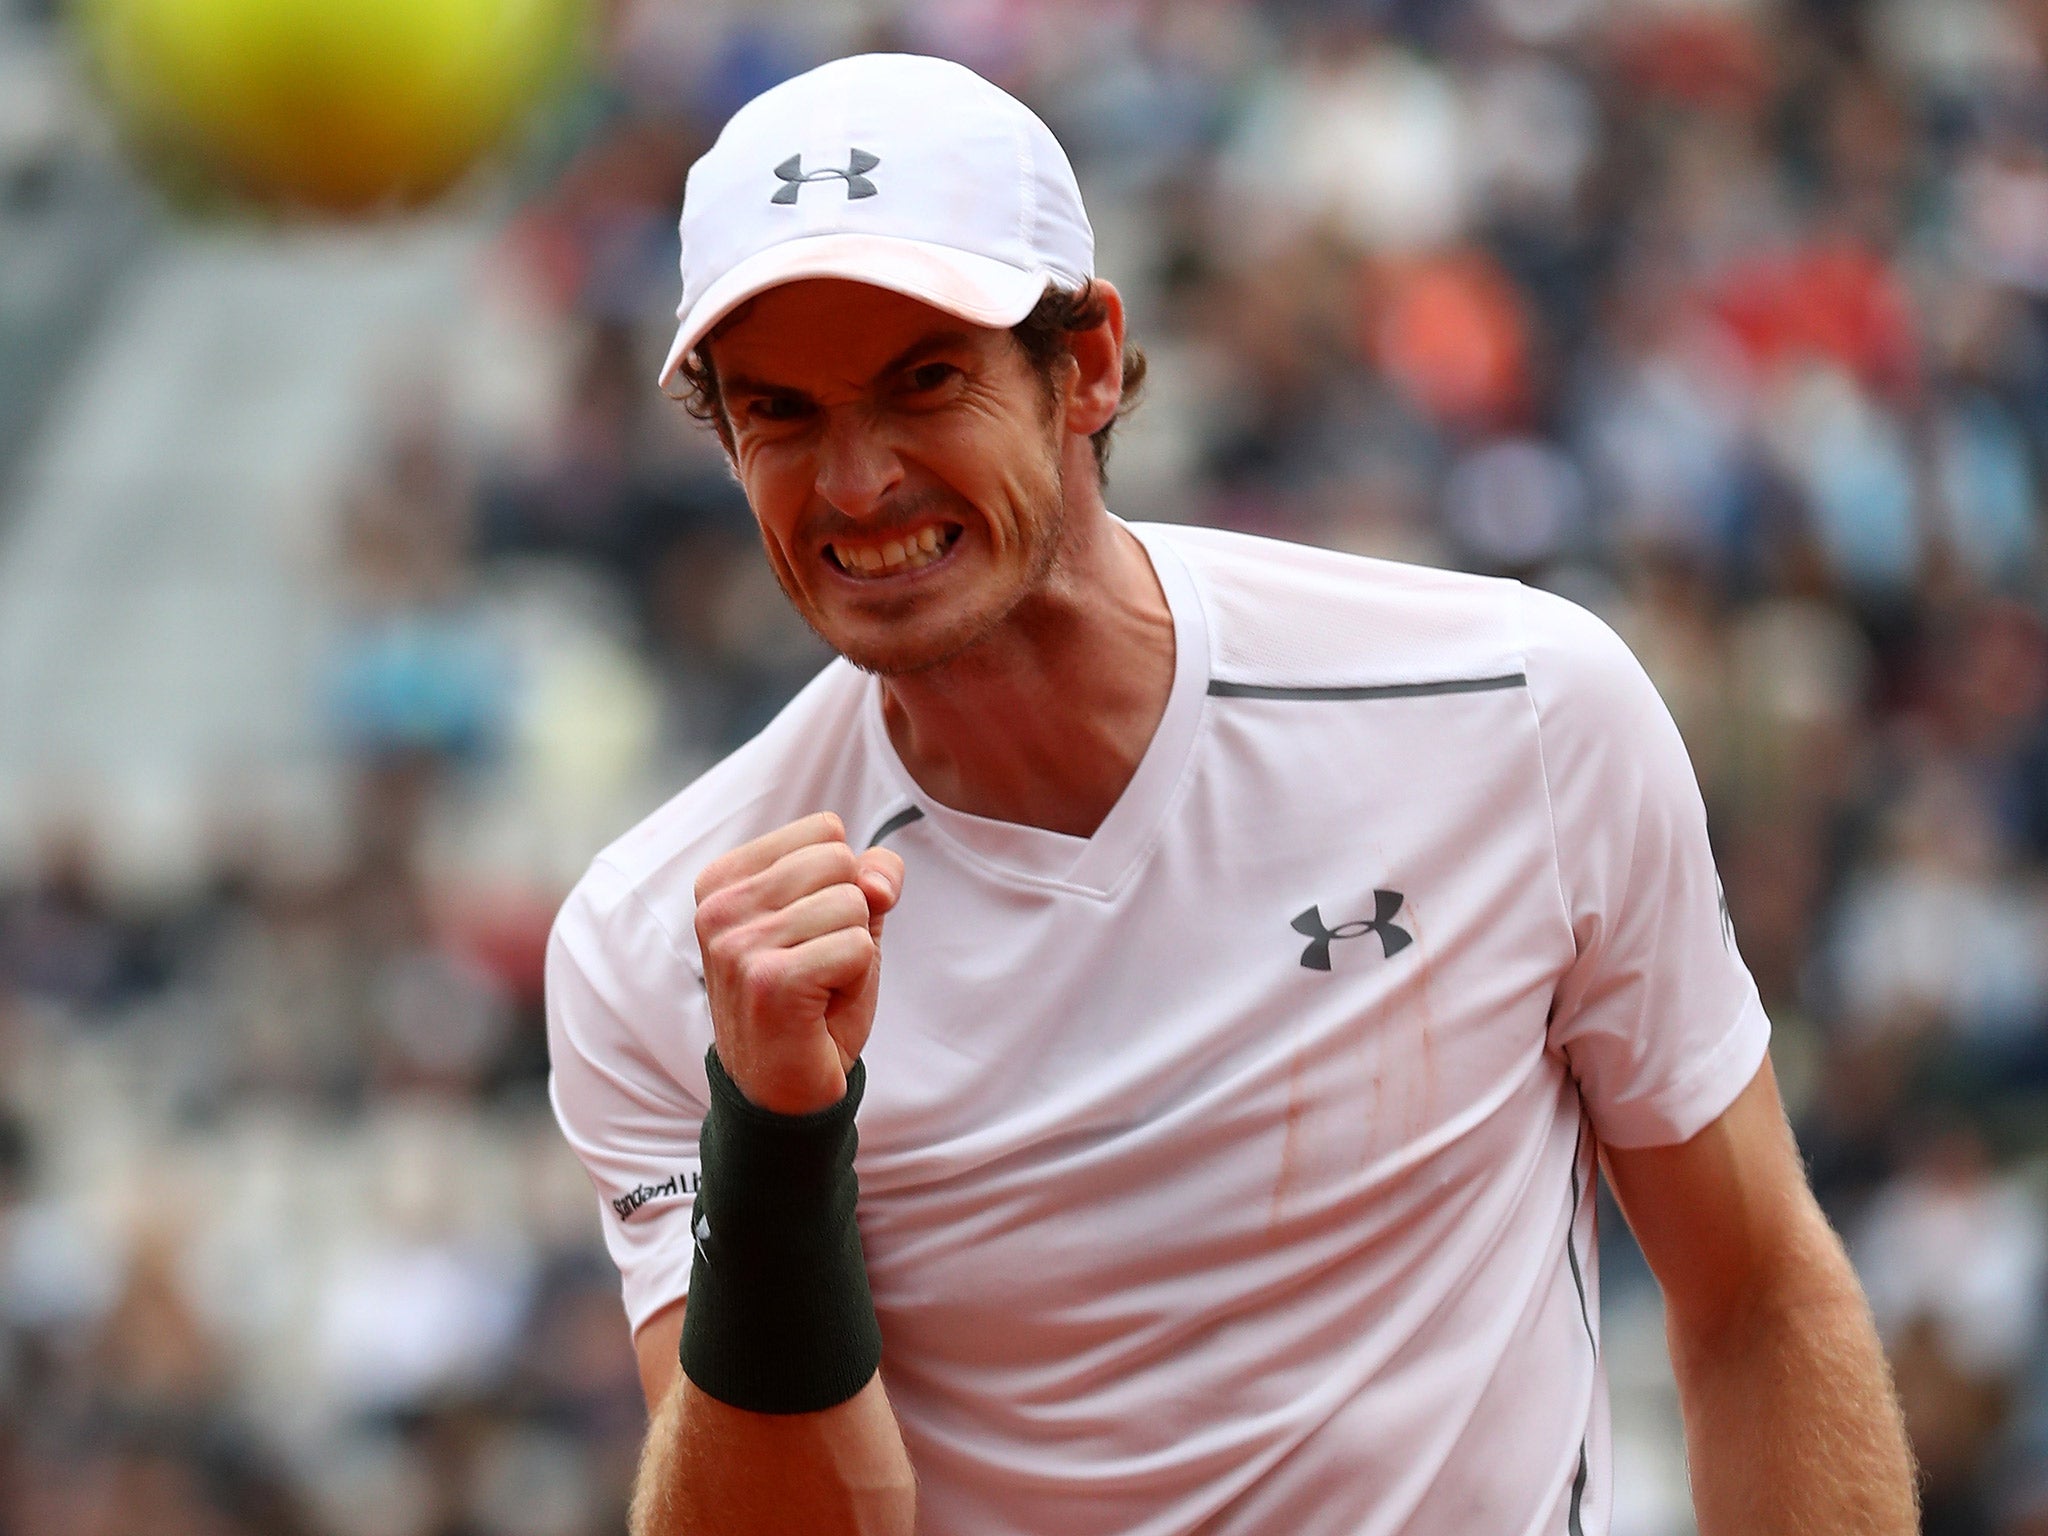 Andy Murray celebrates winning a point against John Isner